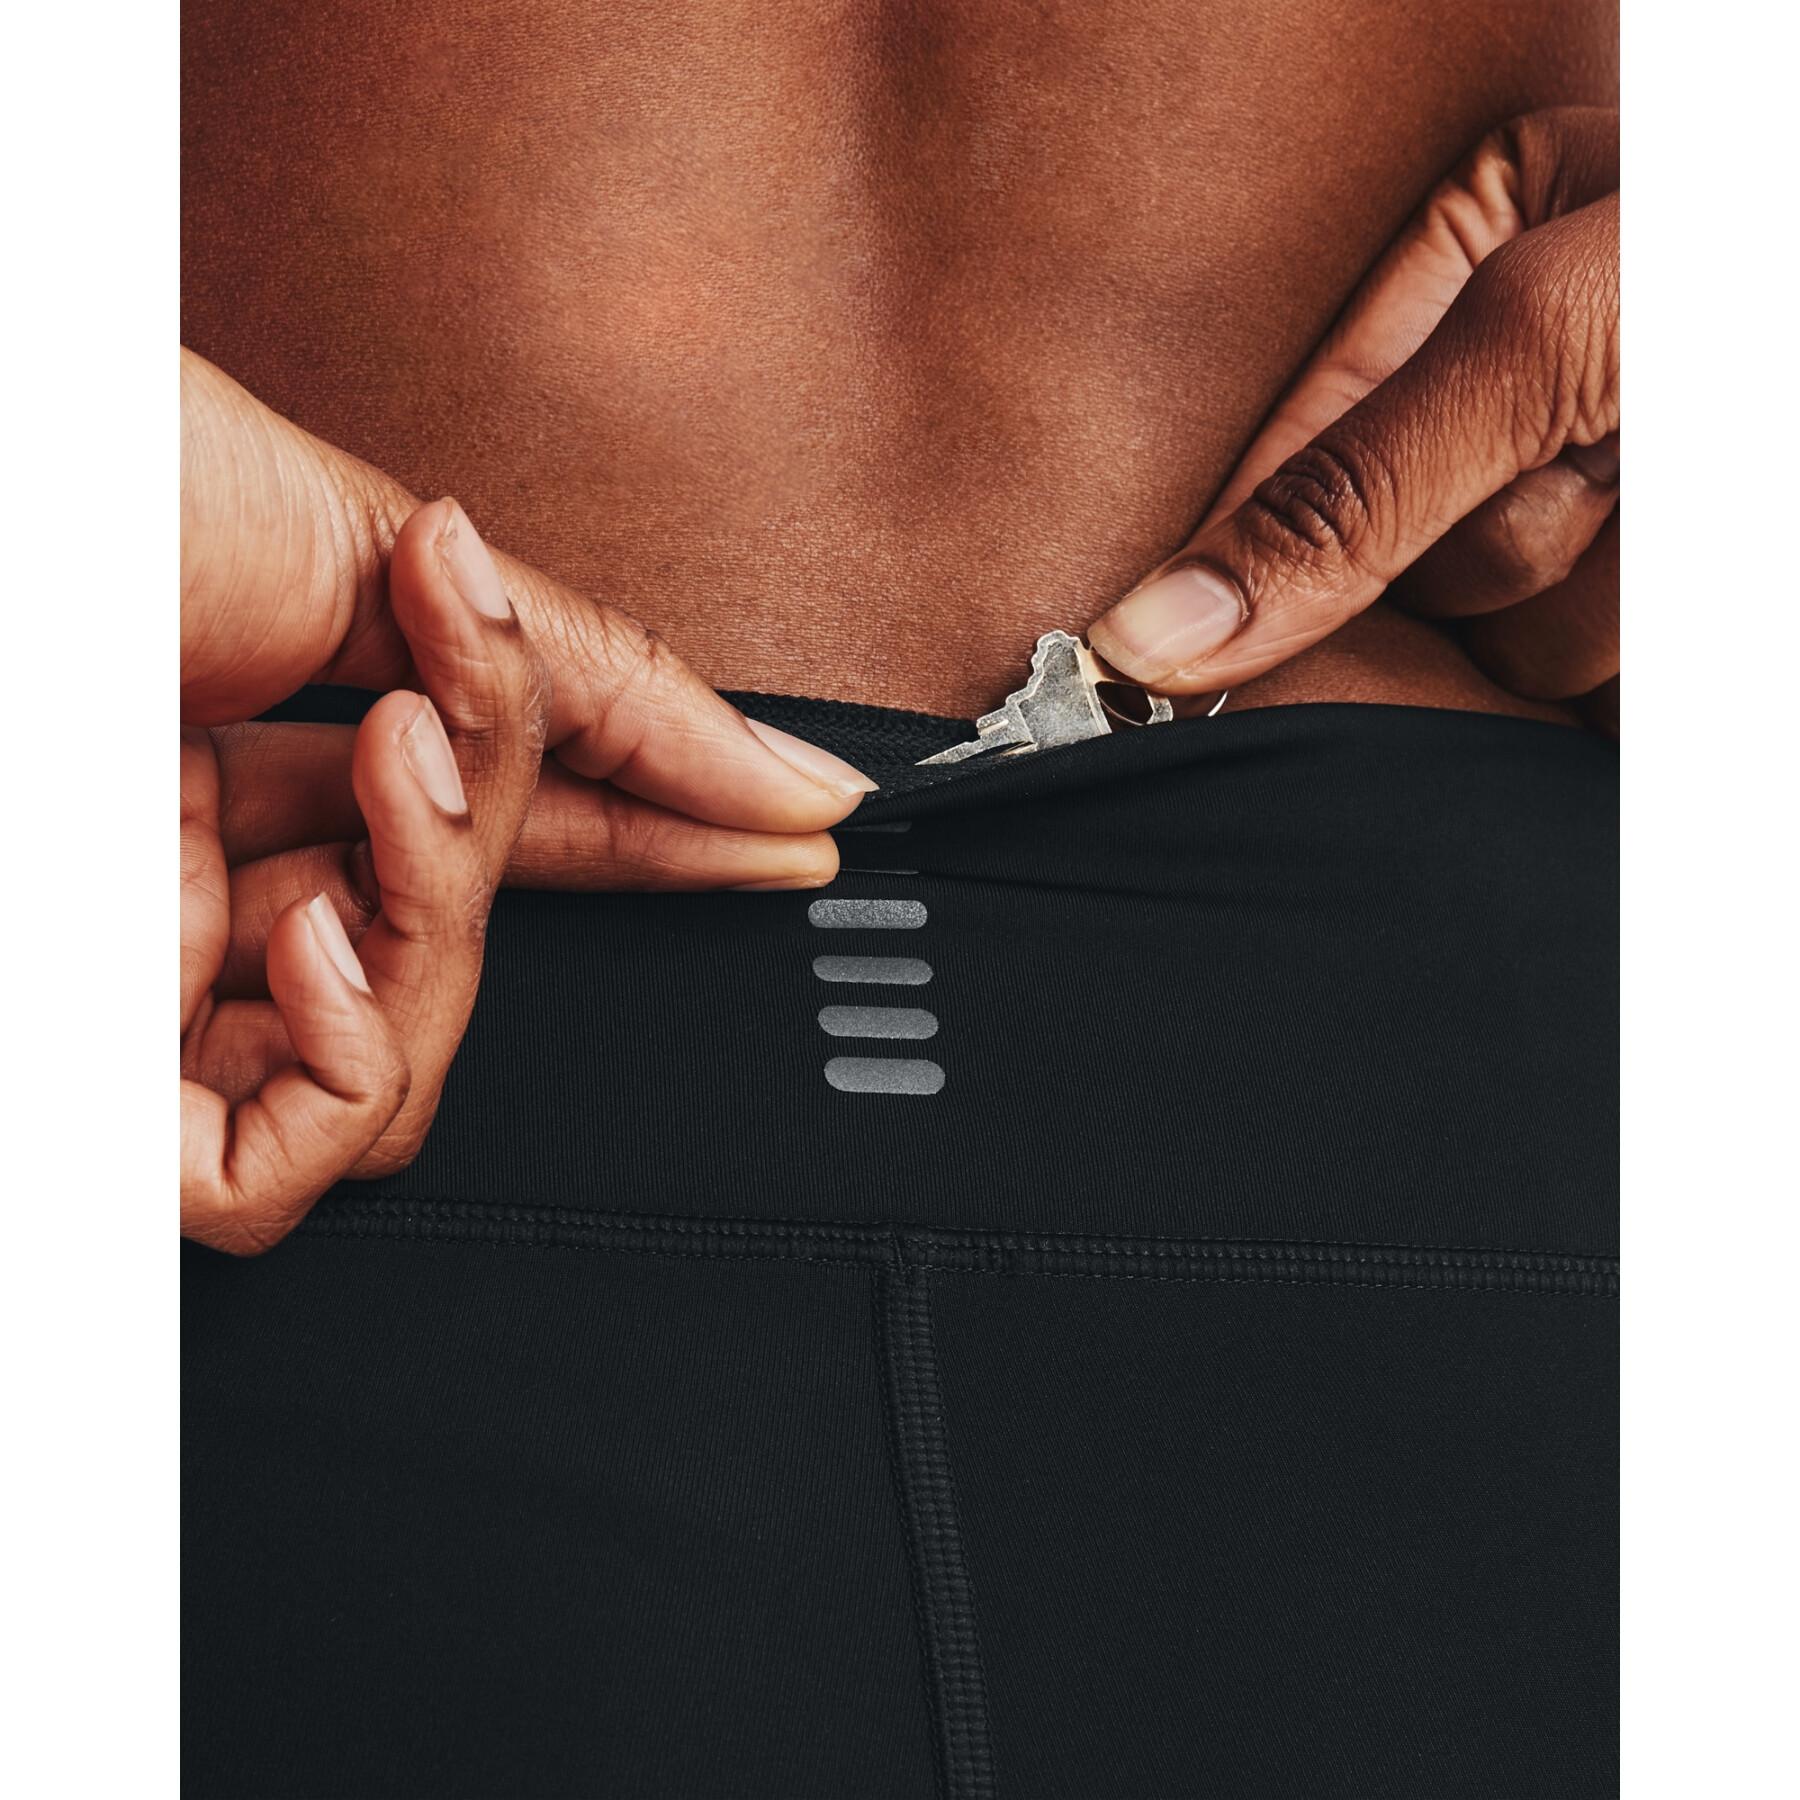 Women's pocket shorts Under Armour Fly Fast